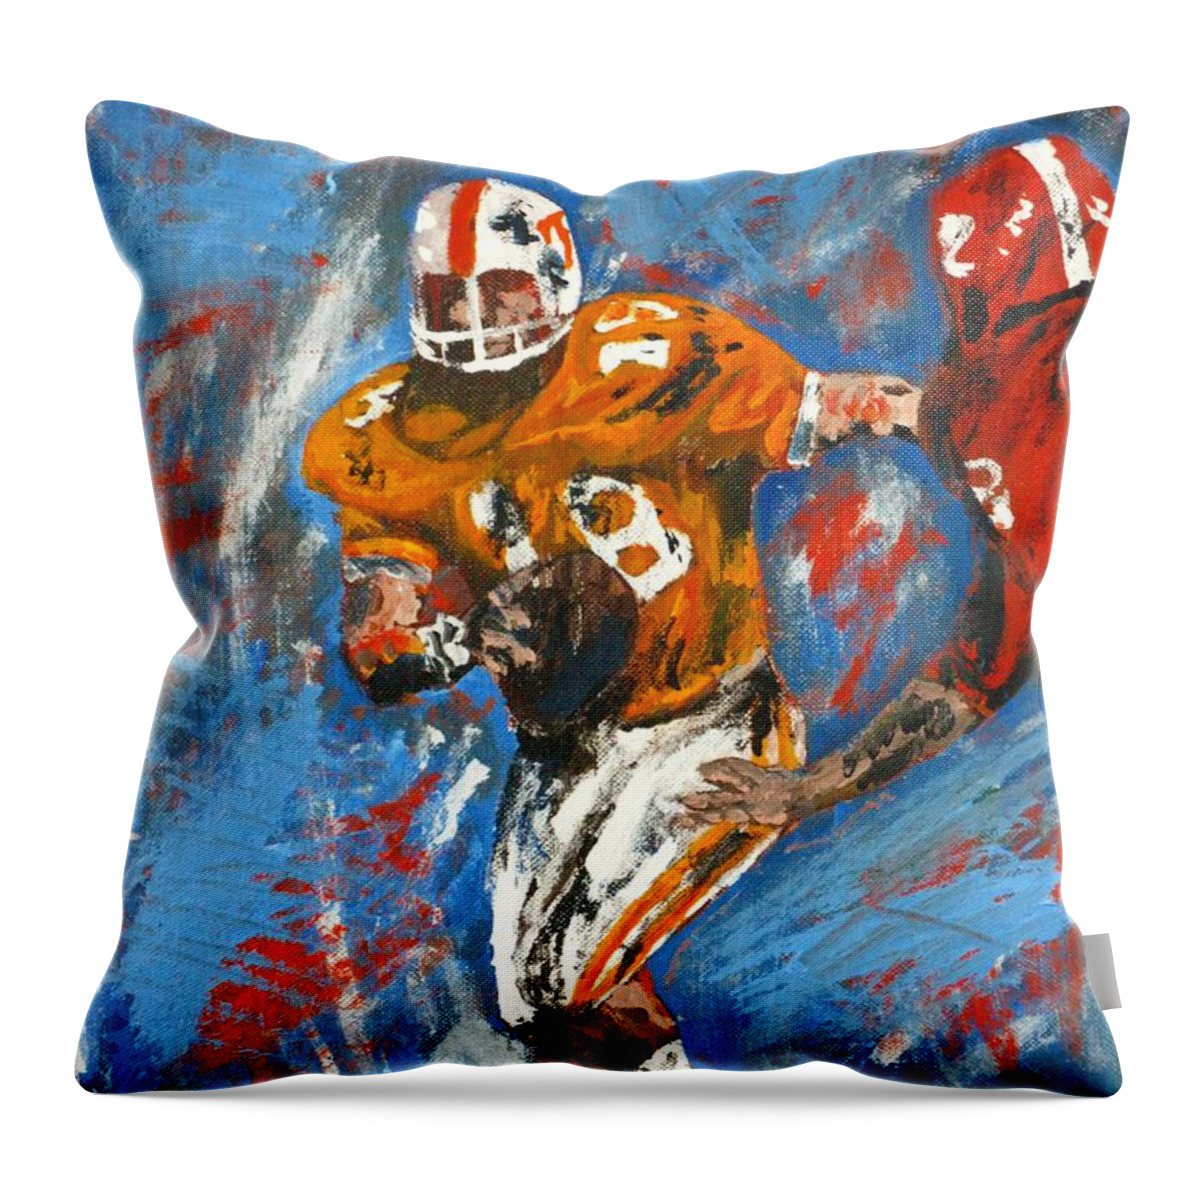 Sports Throw Pillow featuring the painting Football by Michael Anthony Edwards